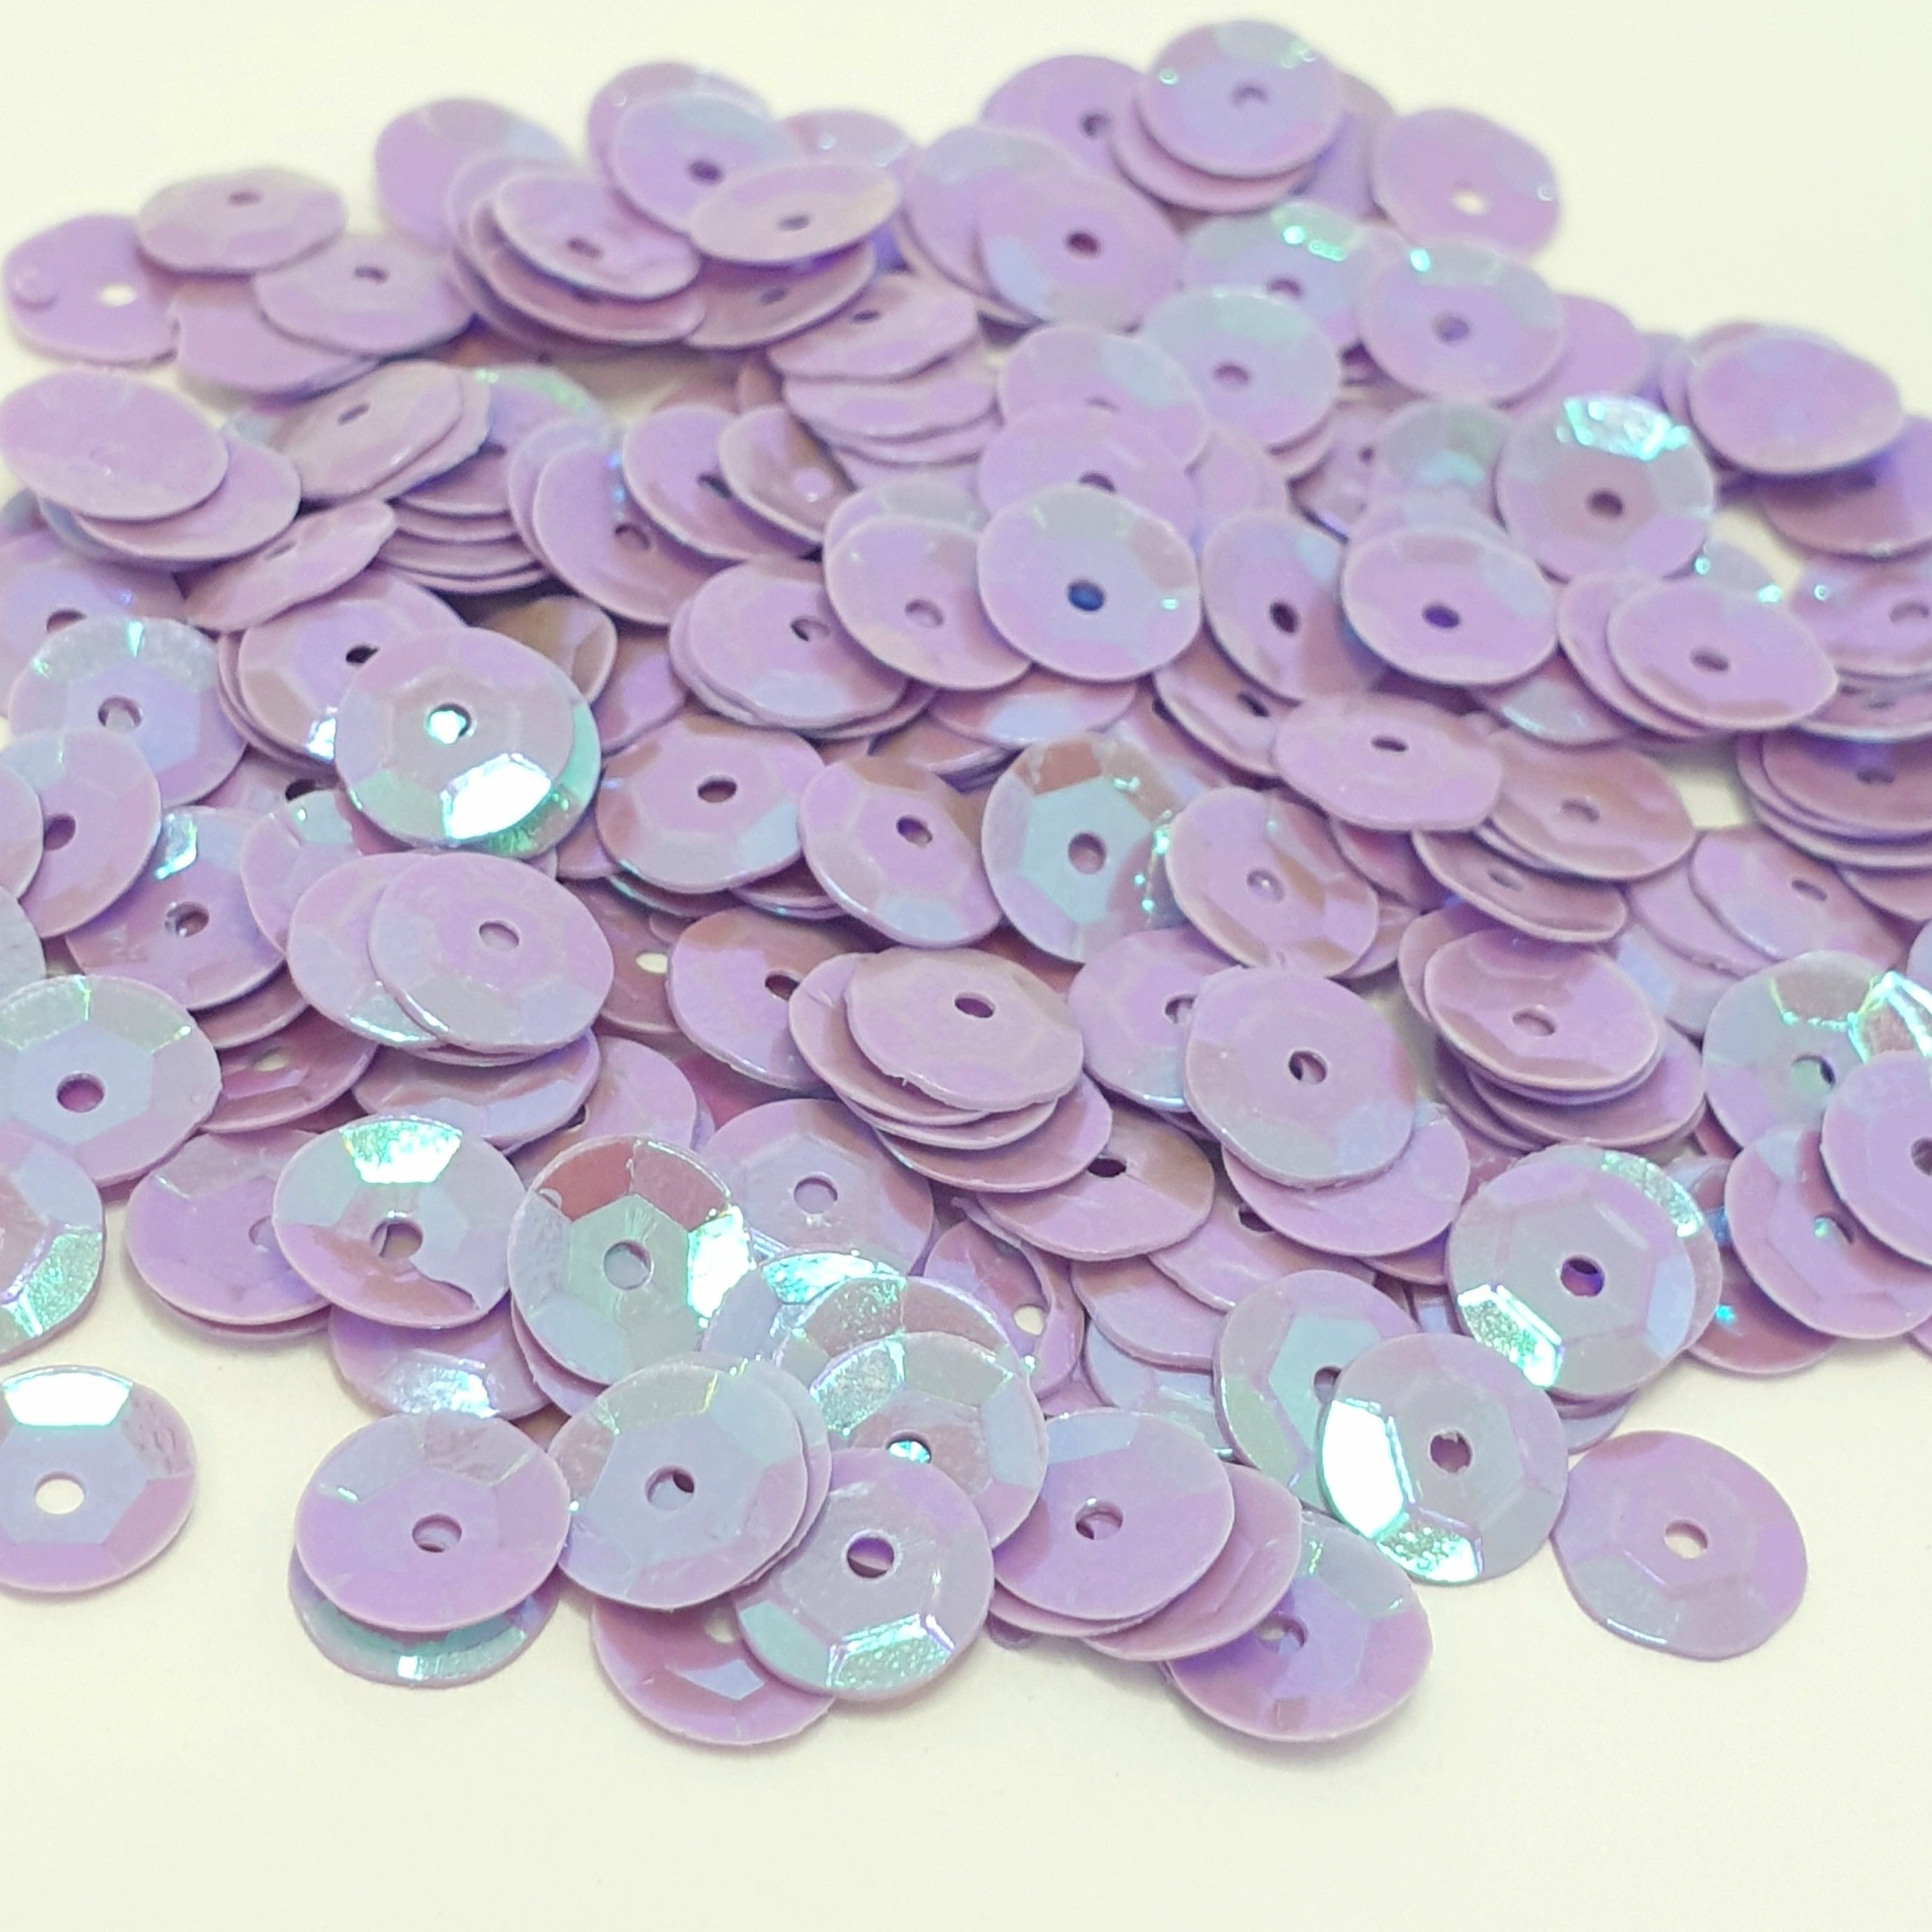 MajorCrafts 50grams 6mm Light Purple AB Round Sew-On Cup Sequins